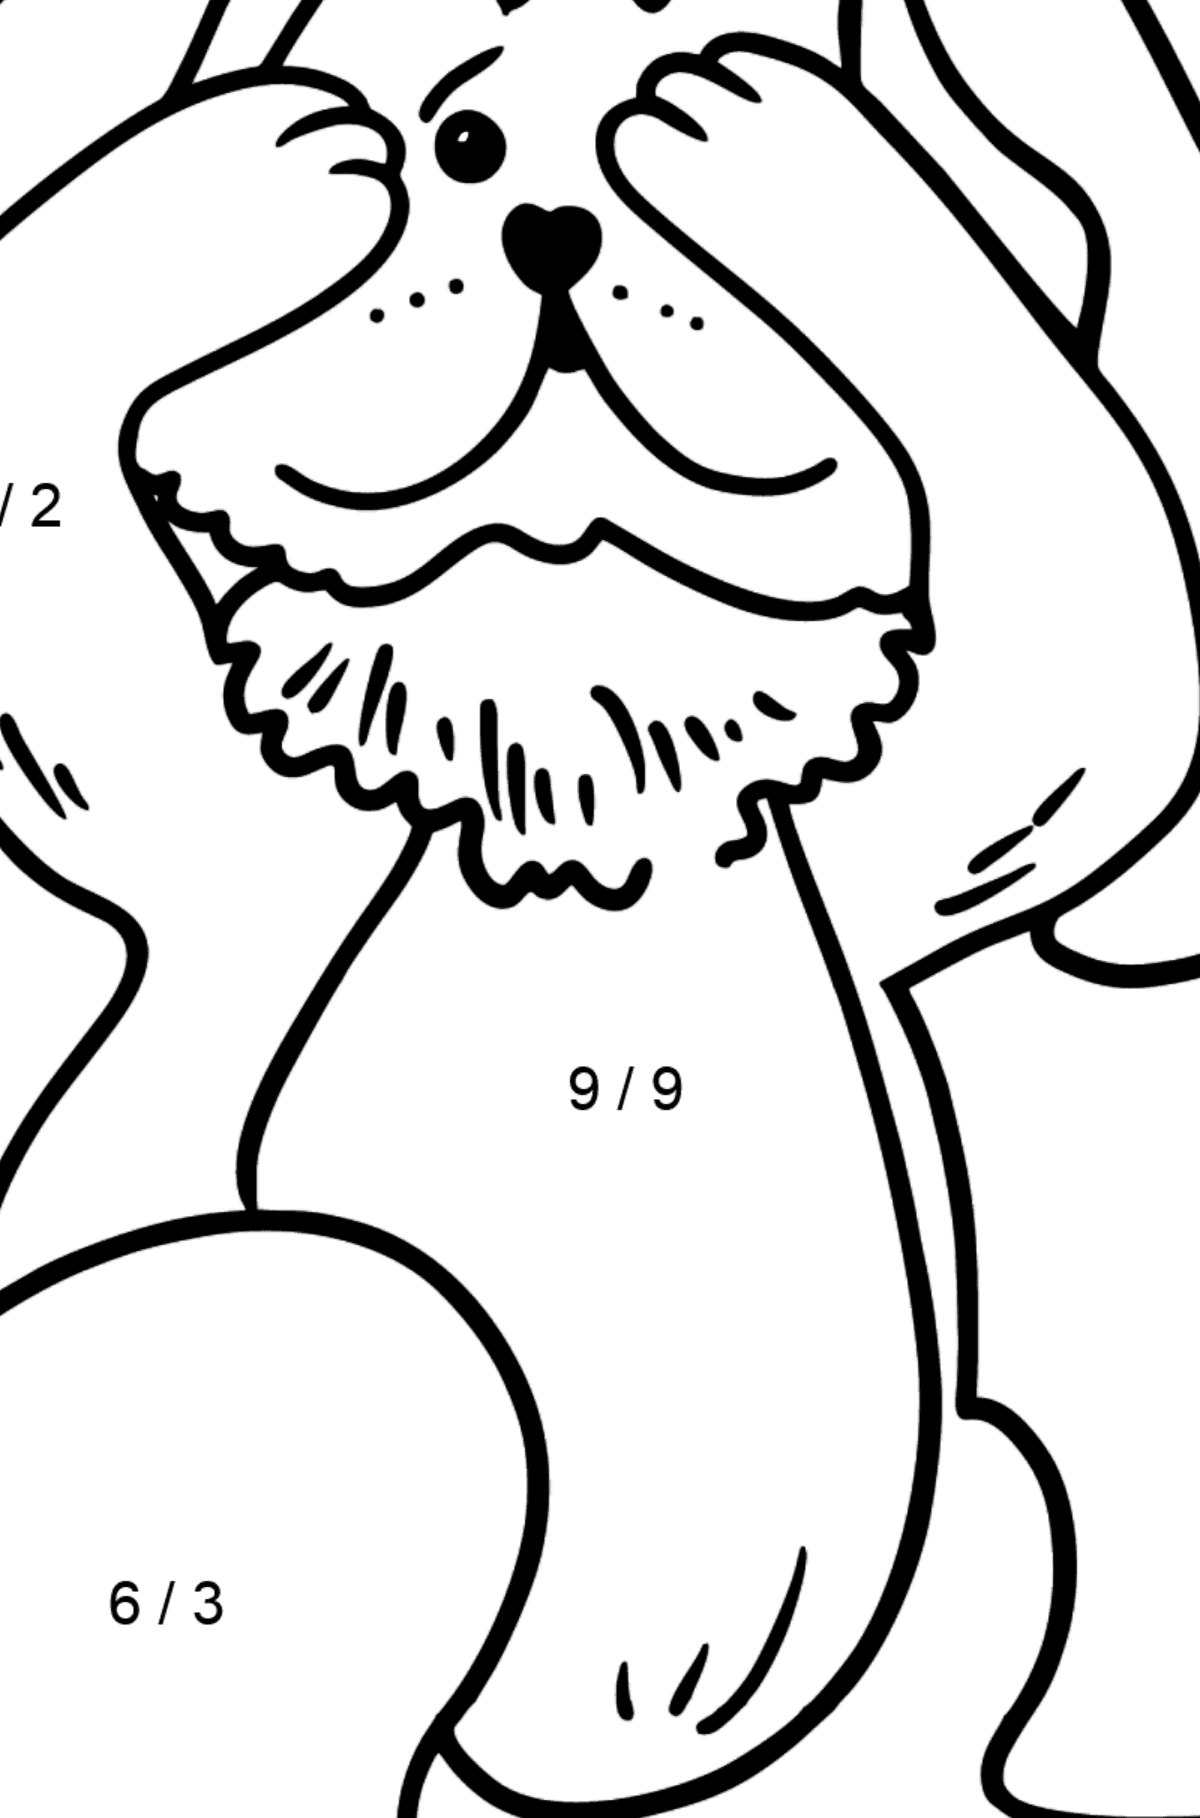 Scared Bunny coloring page - Math Coloring - Division for Kids